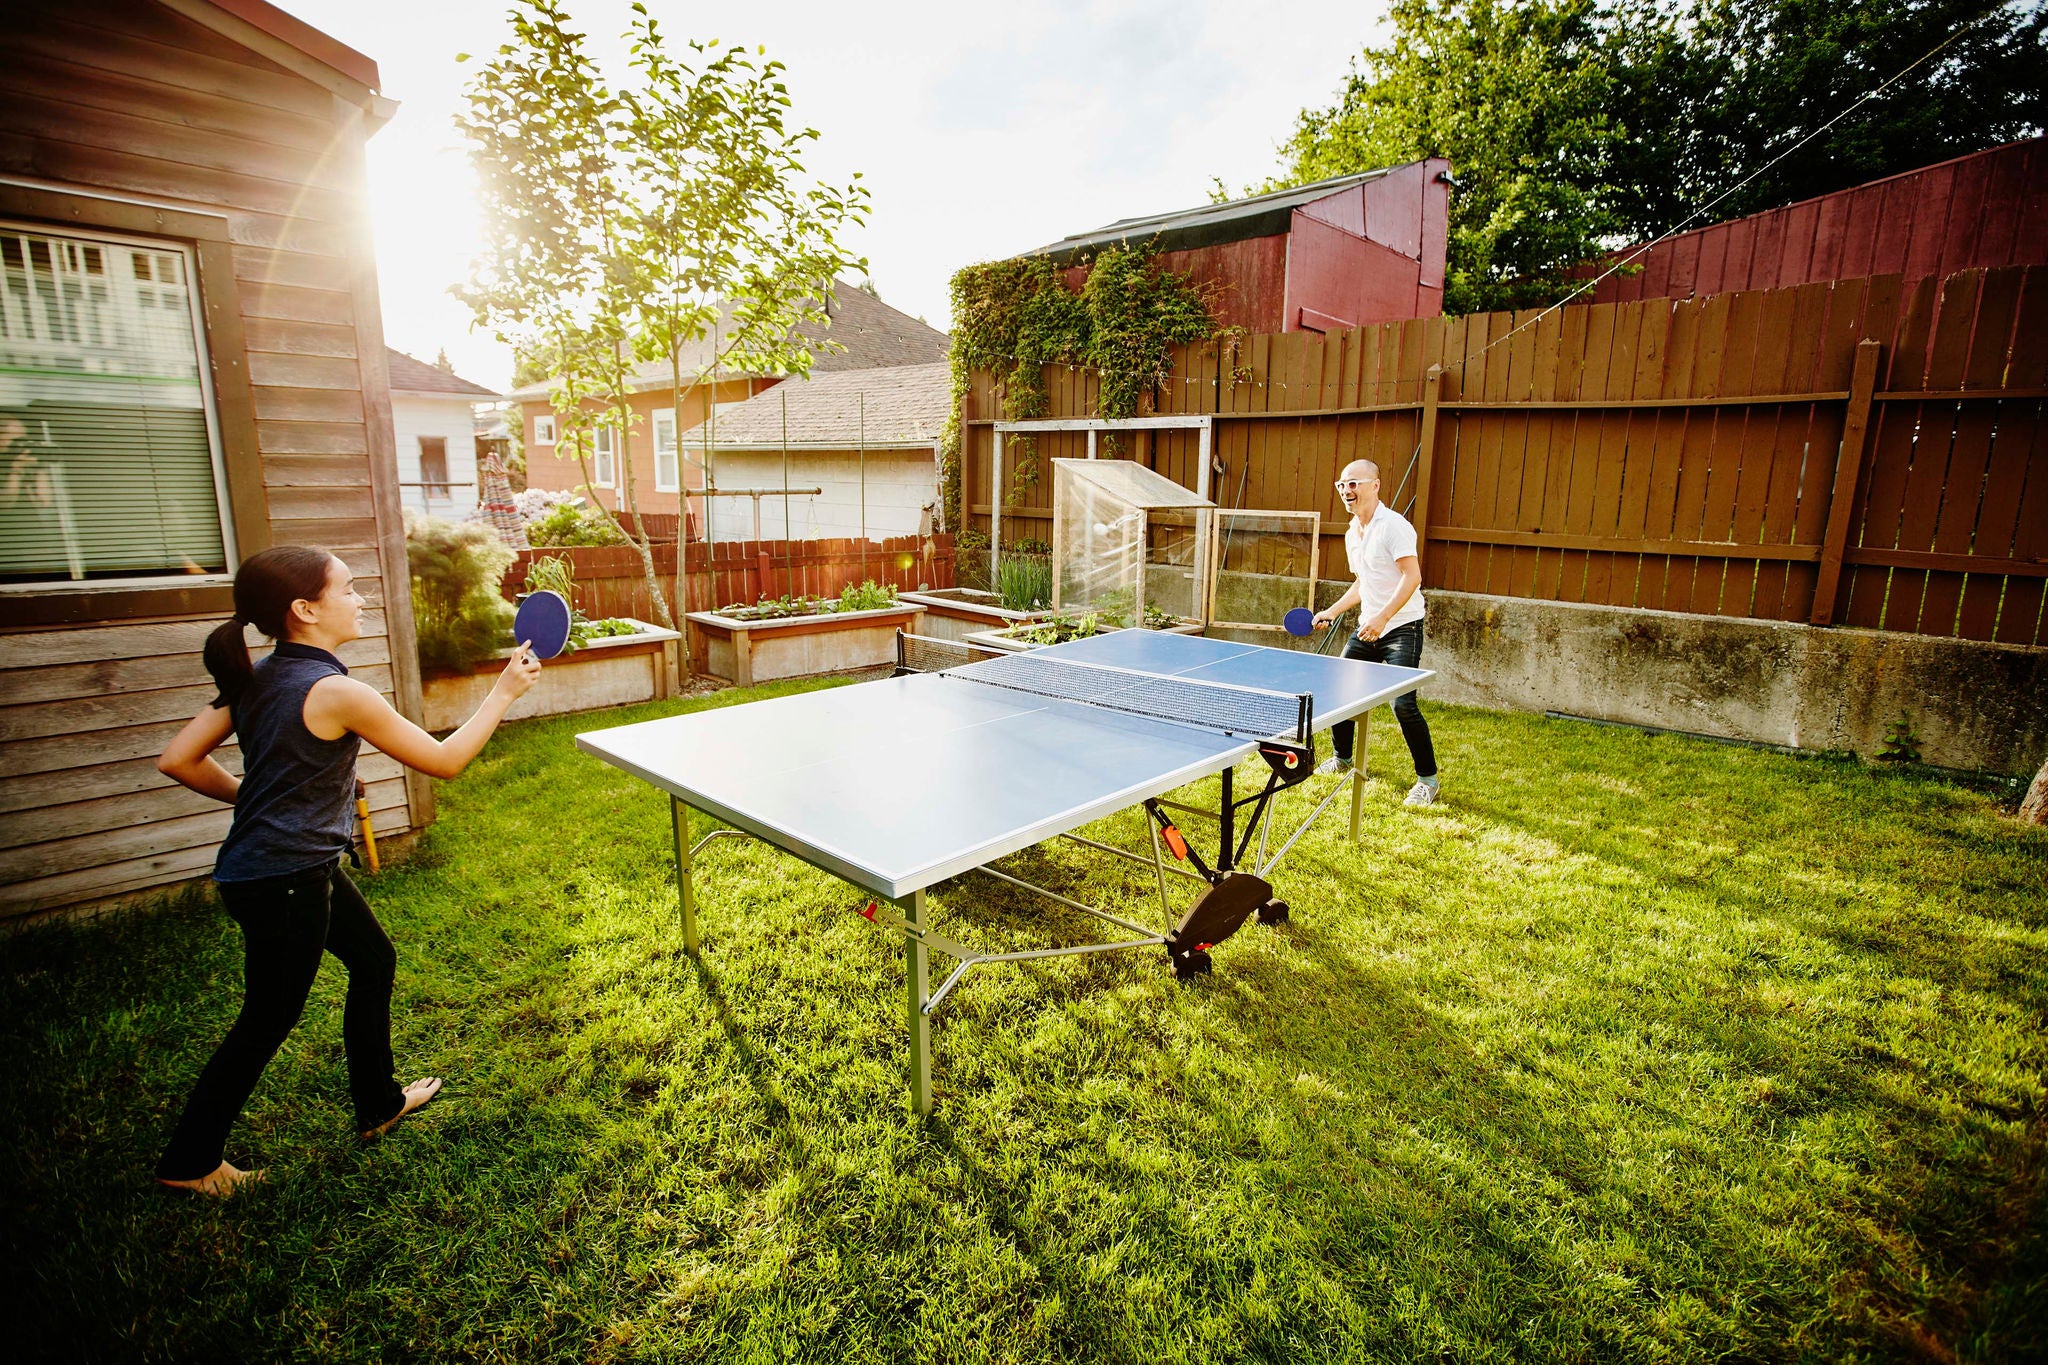 Smiling young daughter and father playing ping pong in backyard of home on summer evening